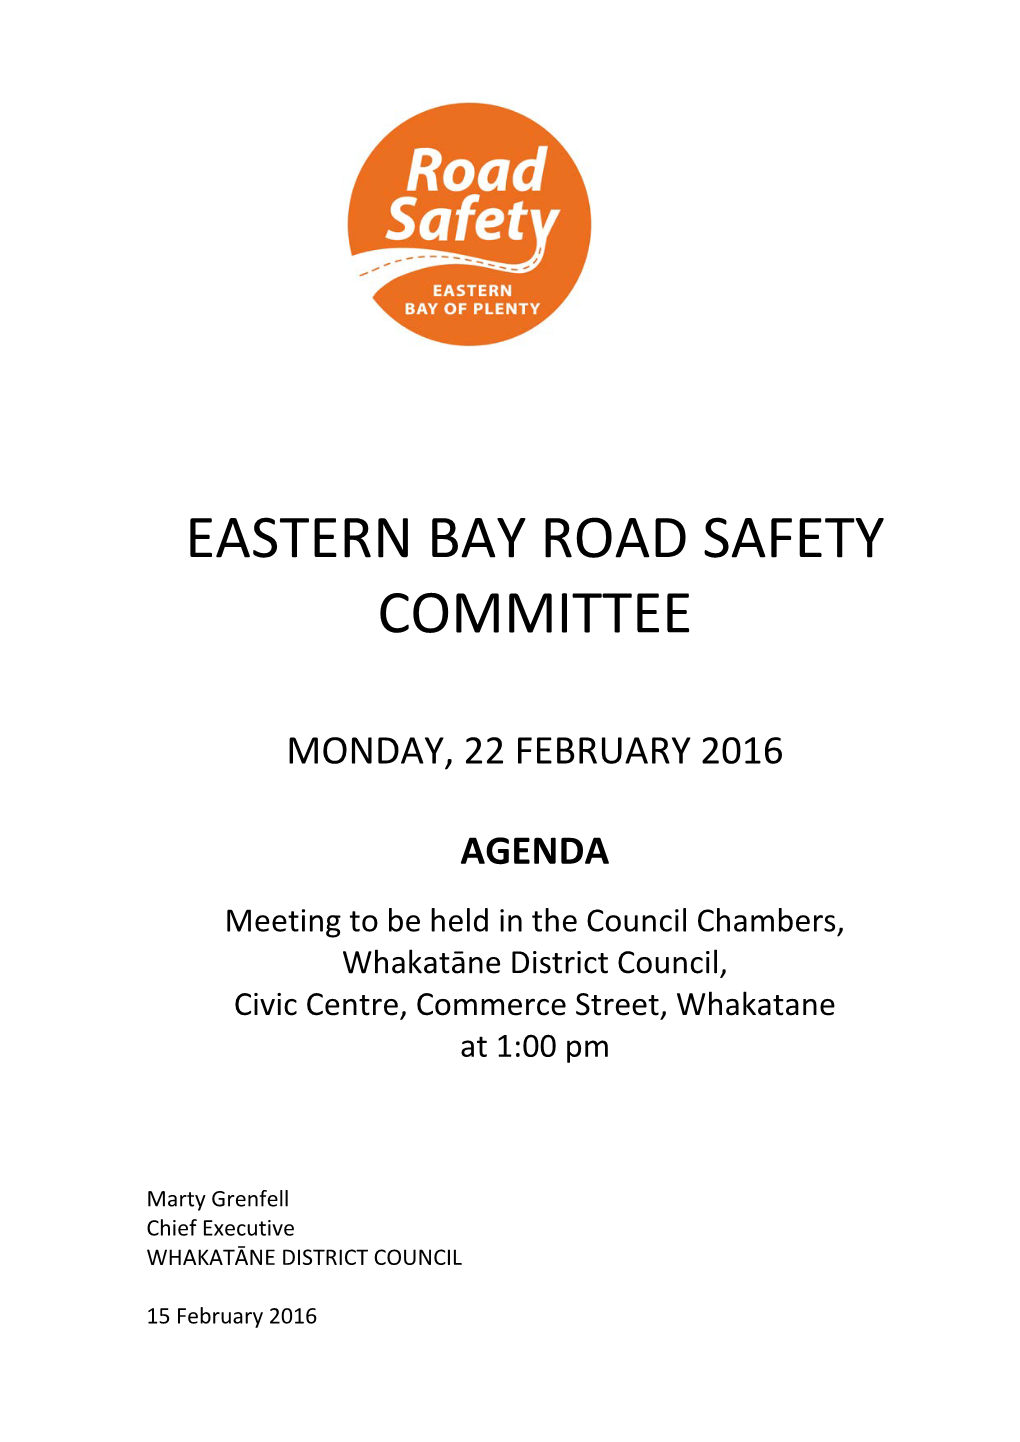 Eastern Bay Road Safety Committee 22